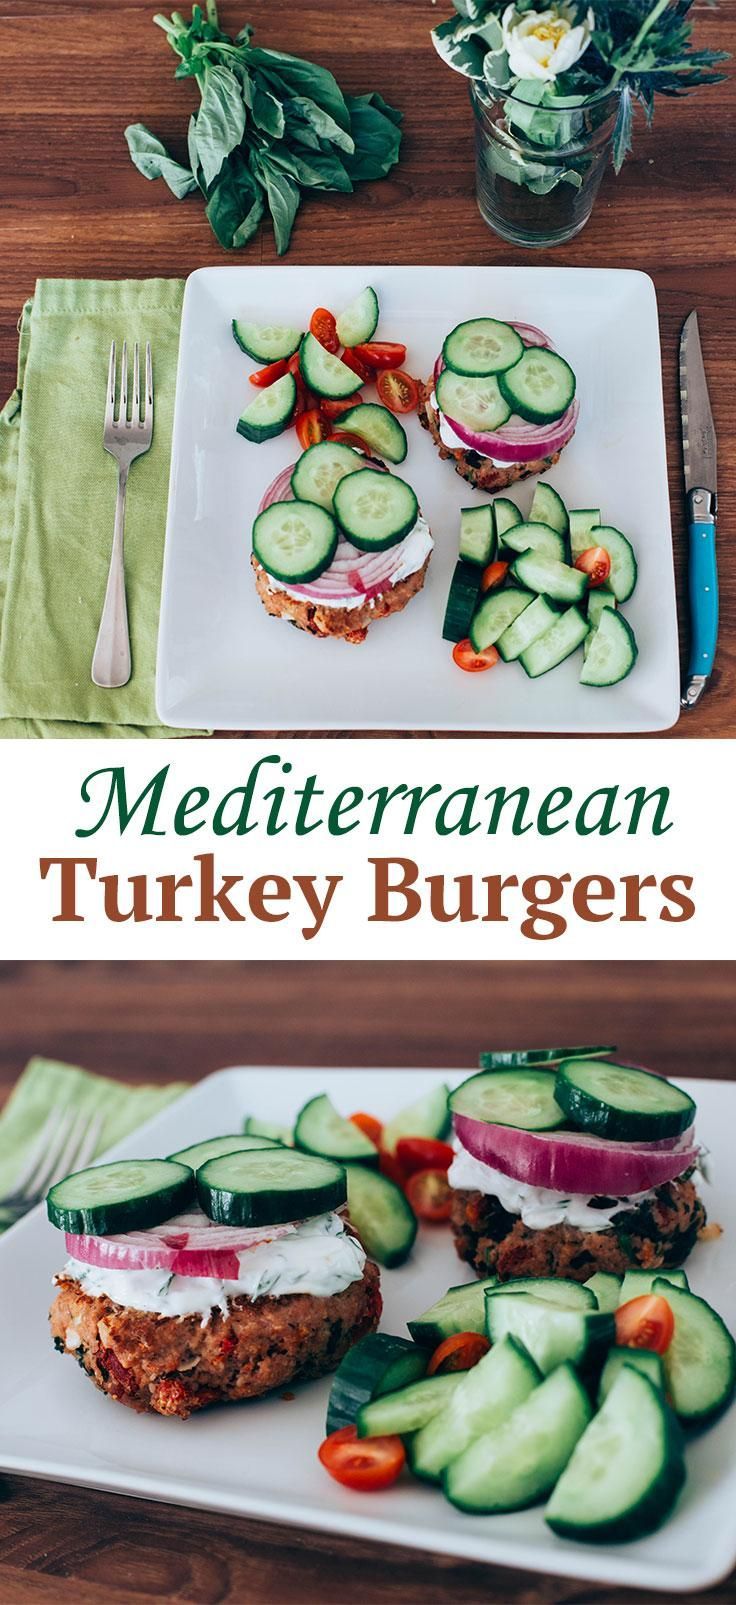 Mediterranean Turkey Burgers — Topped with crunchy veggies and a tangy yogurt sauce, these high-protein turkey burger patties